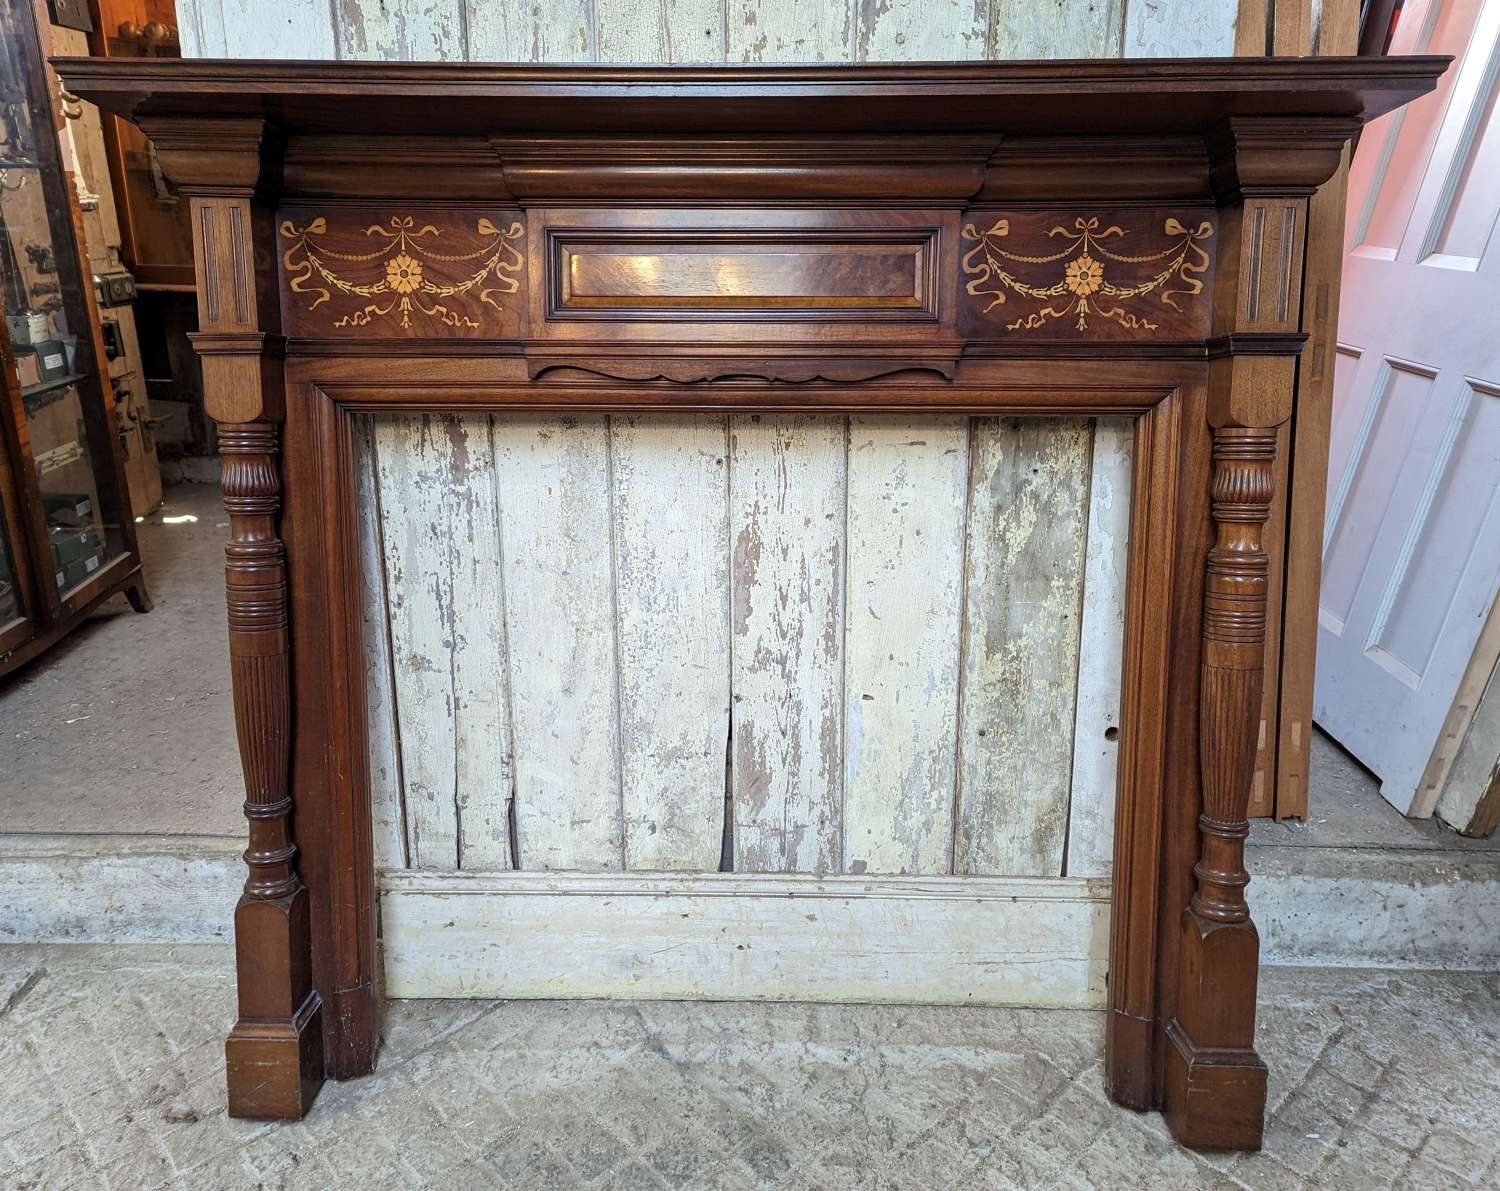 FS0234 A LARGE RECLAIMED INLAYED / MARQUETRY MAHOGANY FIRE SURROUND